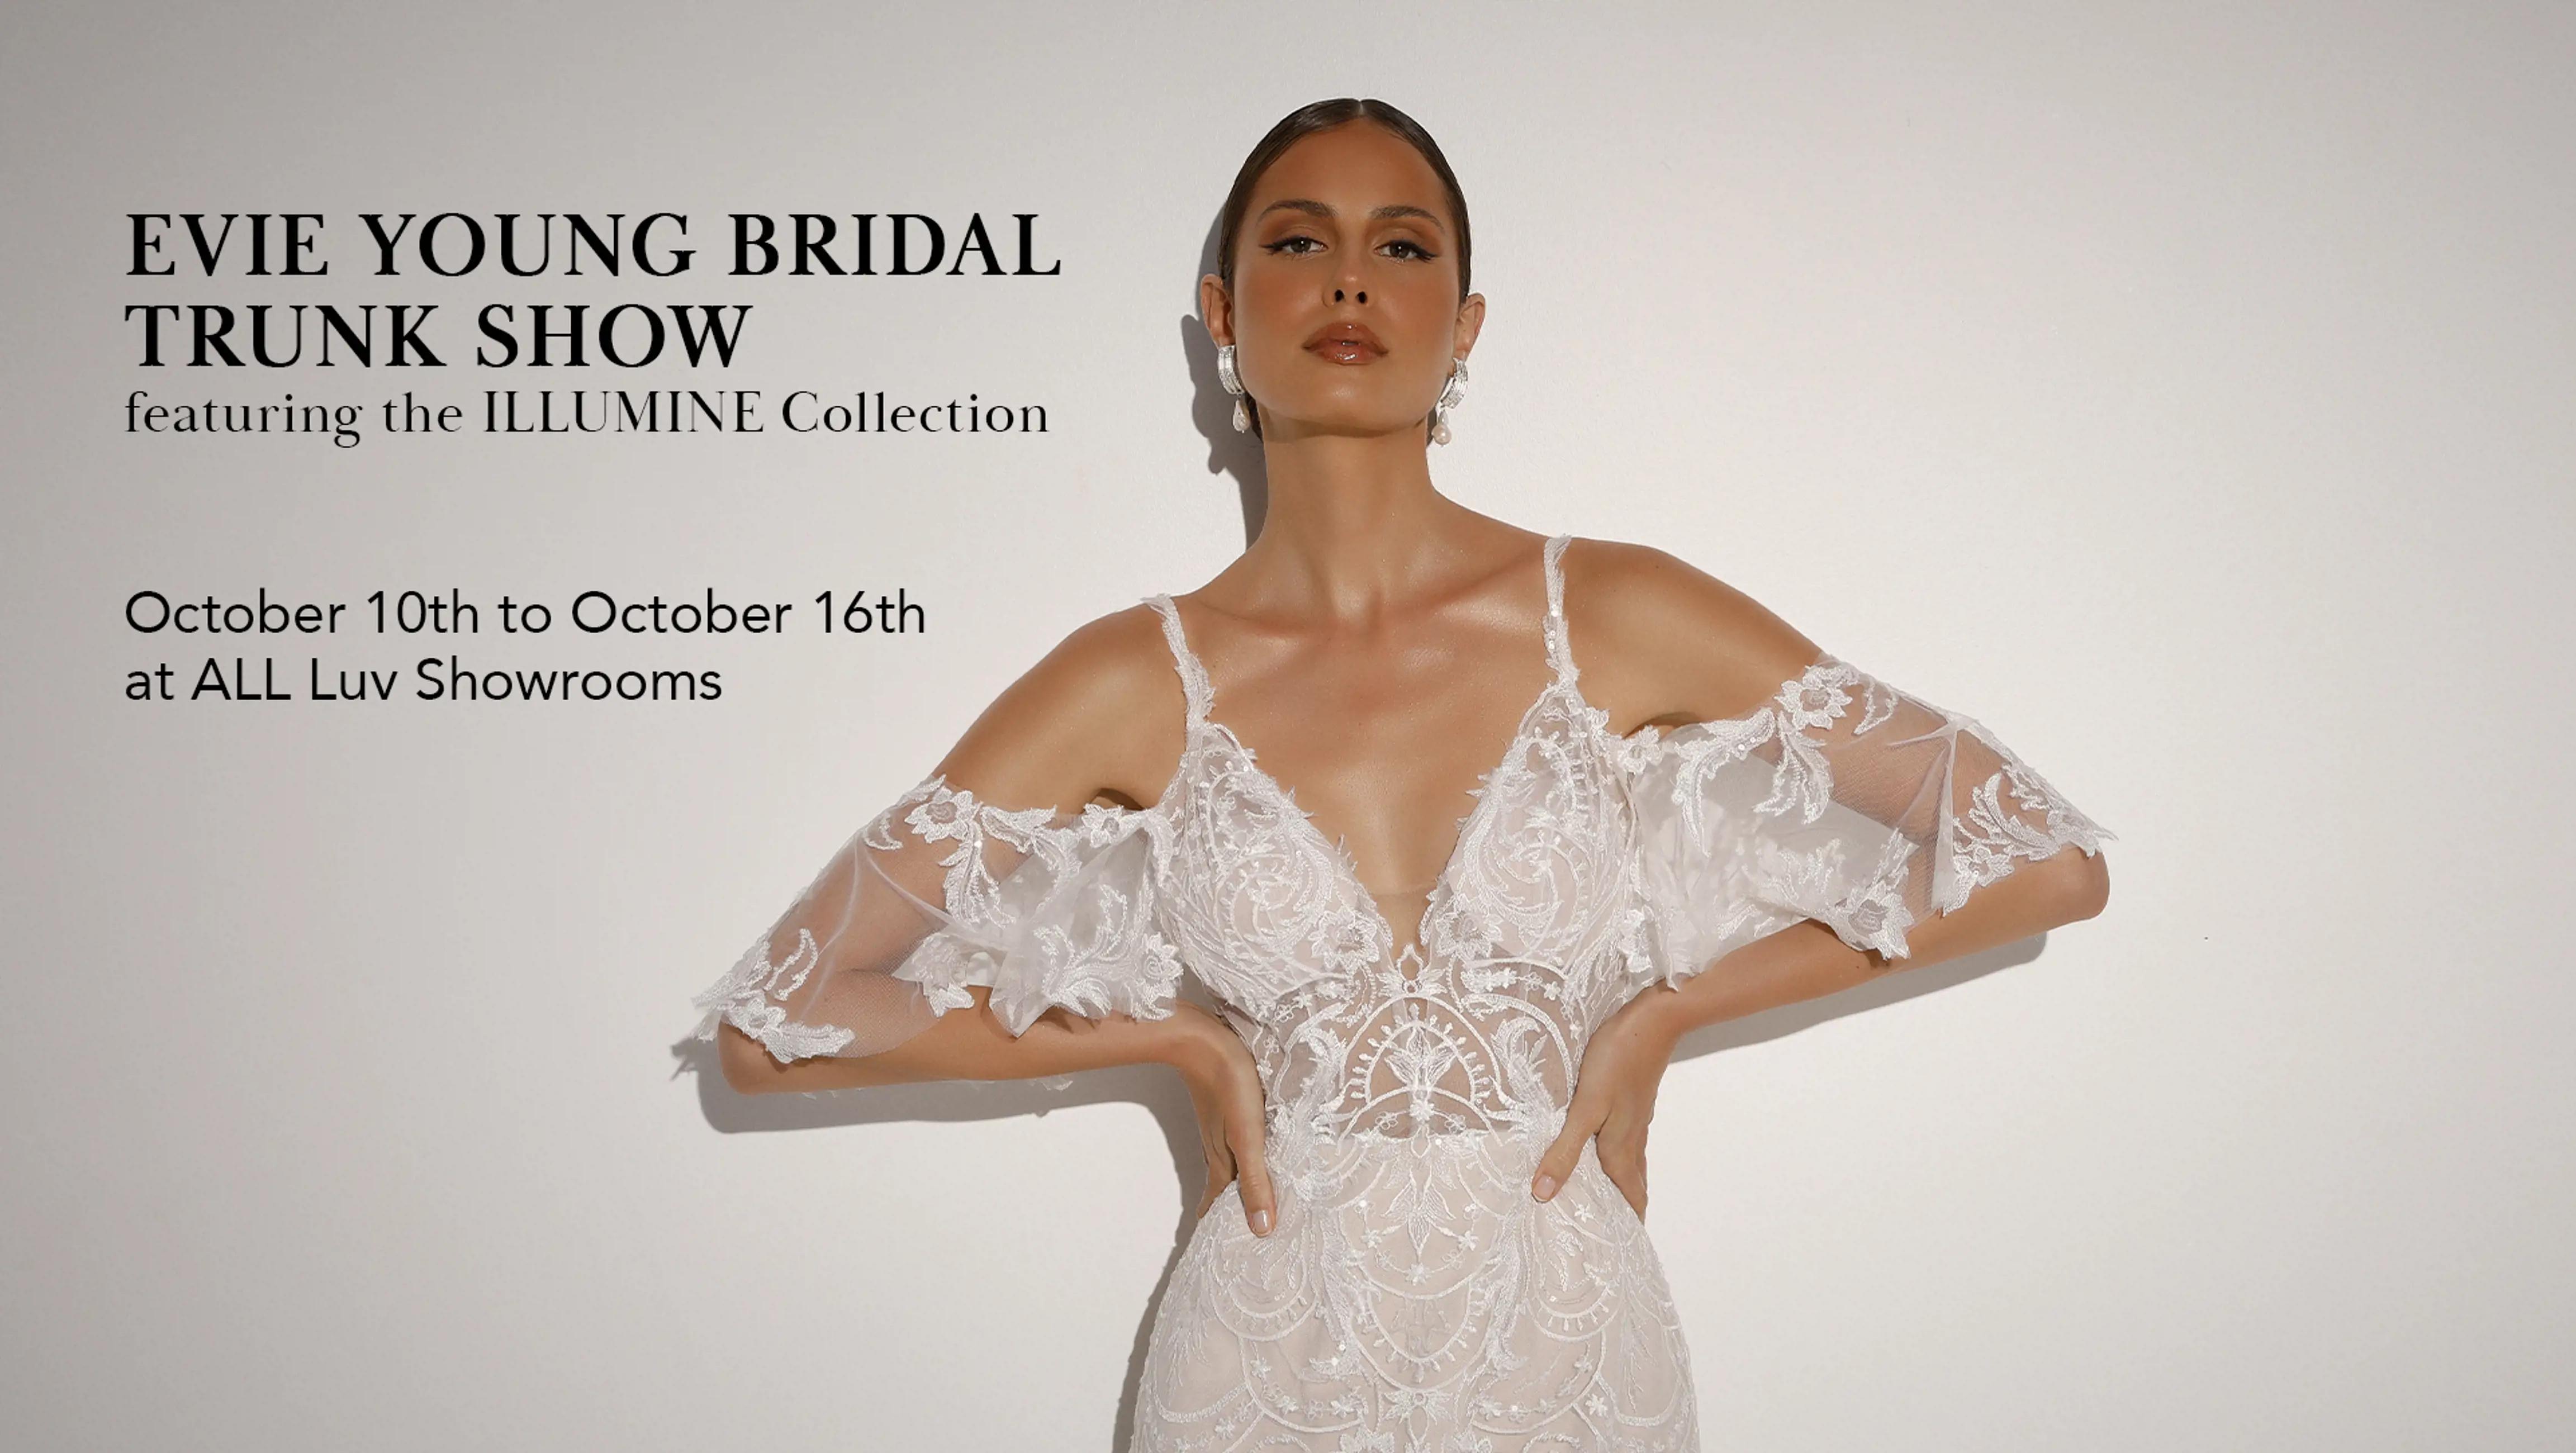 Evie Young Bridal Trunk Show October 10th to 16th